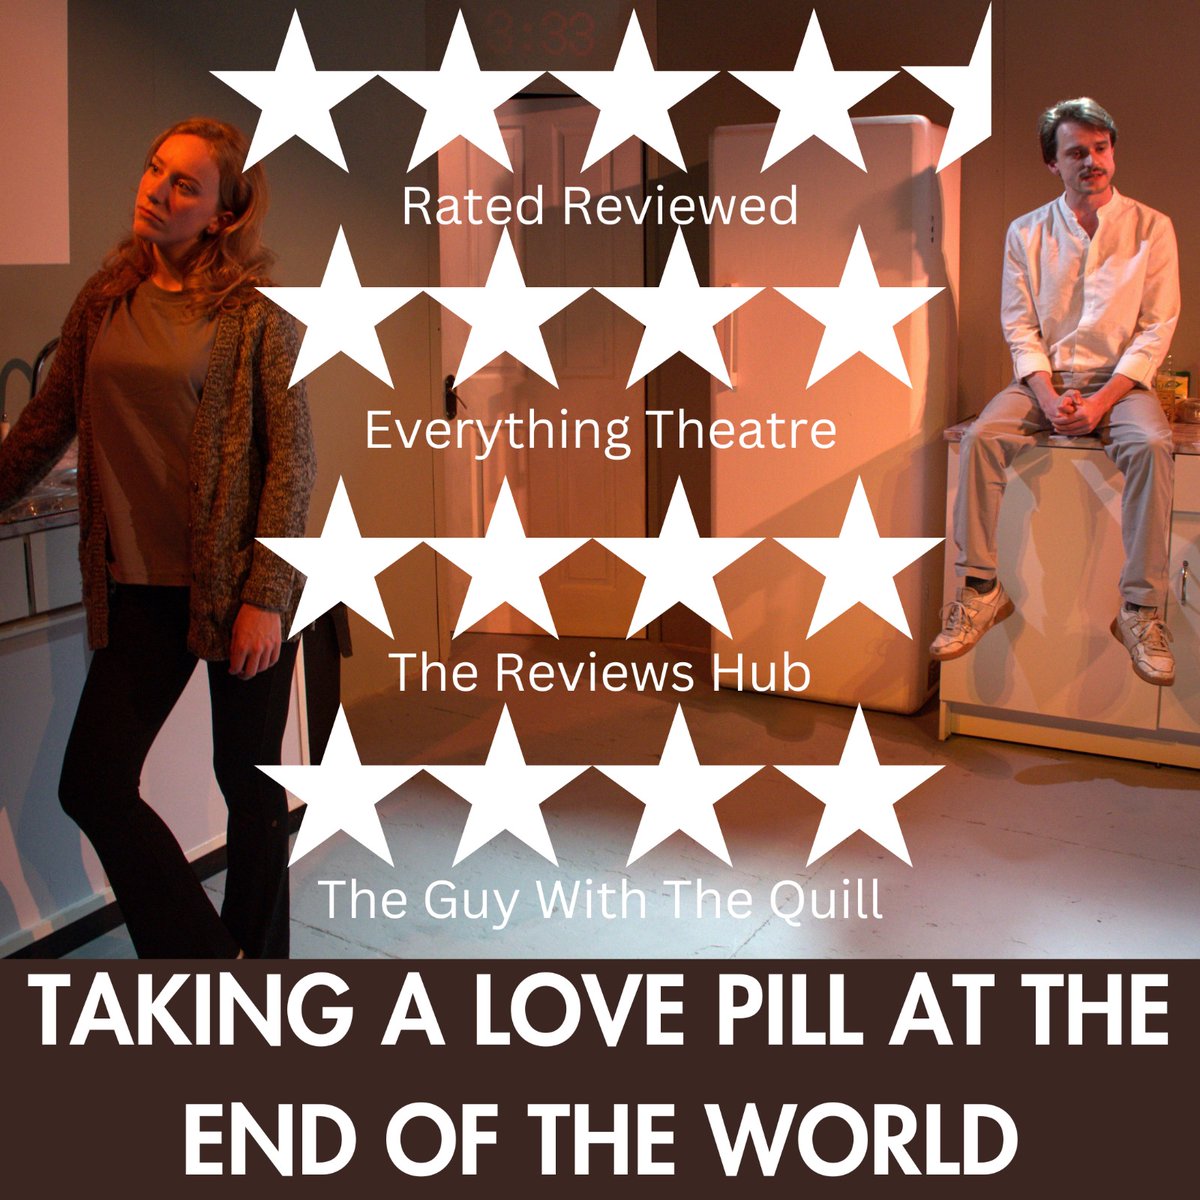 We're seeing stars! It doesn't get much better than this 🌟 We're back for Week Two of our three week residency at @thehopetheatre tonight. Come see the highly acclaimed Taking a Love Pill at the End of the World - the reviews speak for themselves! 📸 @bethanymonklane